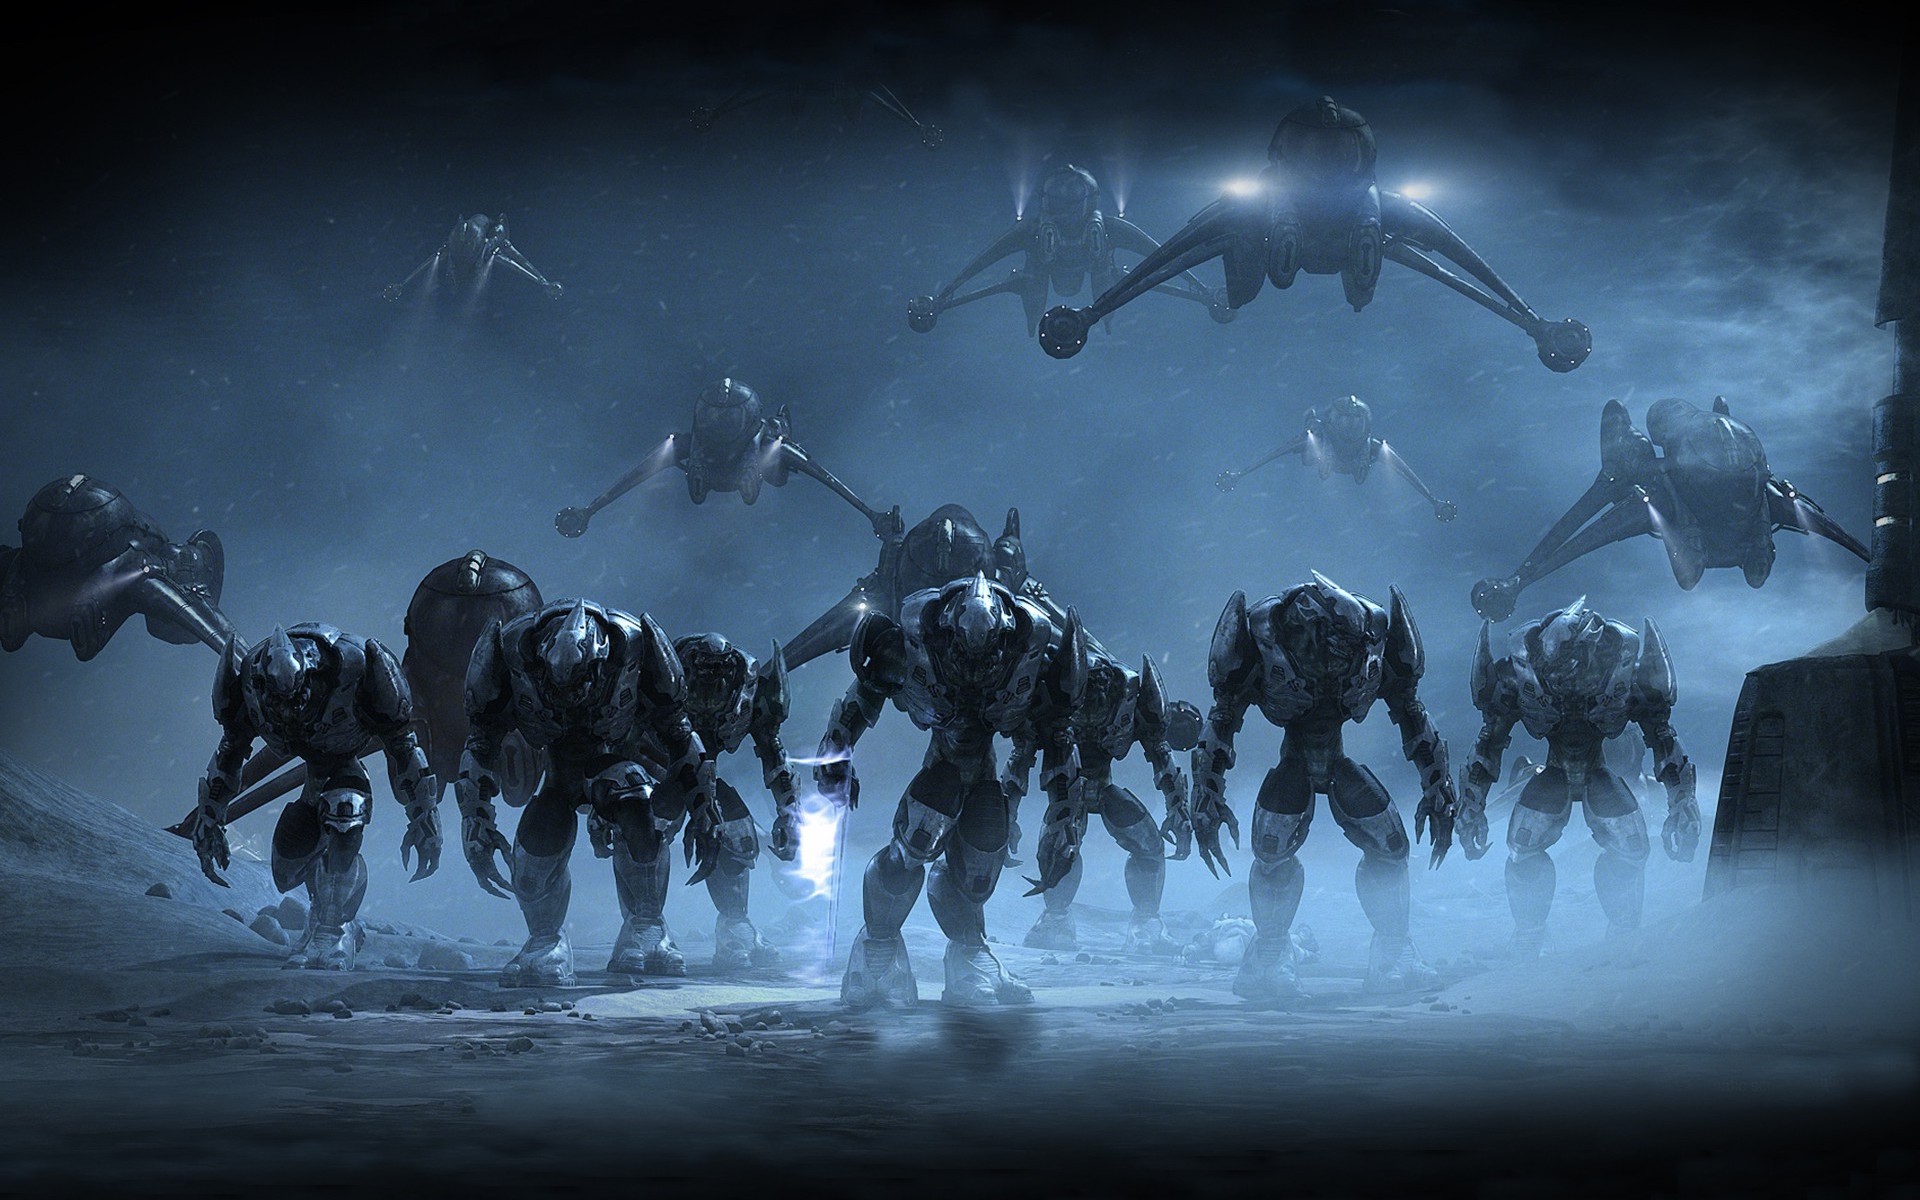 Free HQ Halo Army Wallpaper   Free HQ Wallpapers